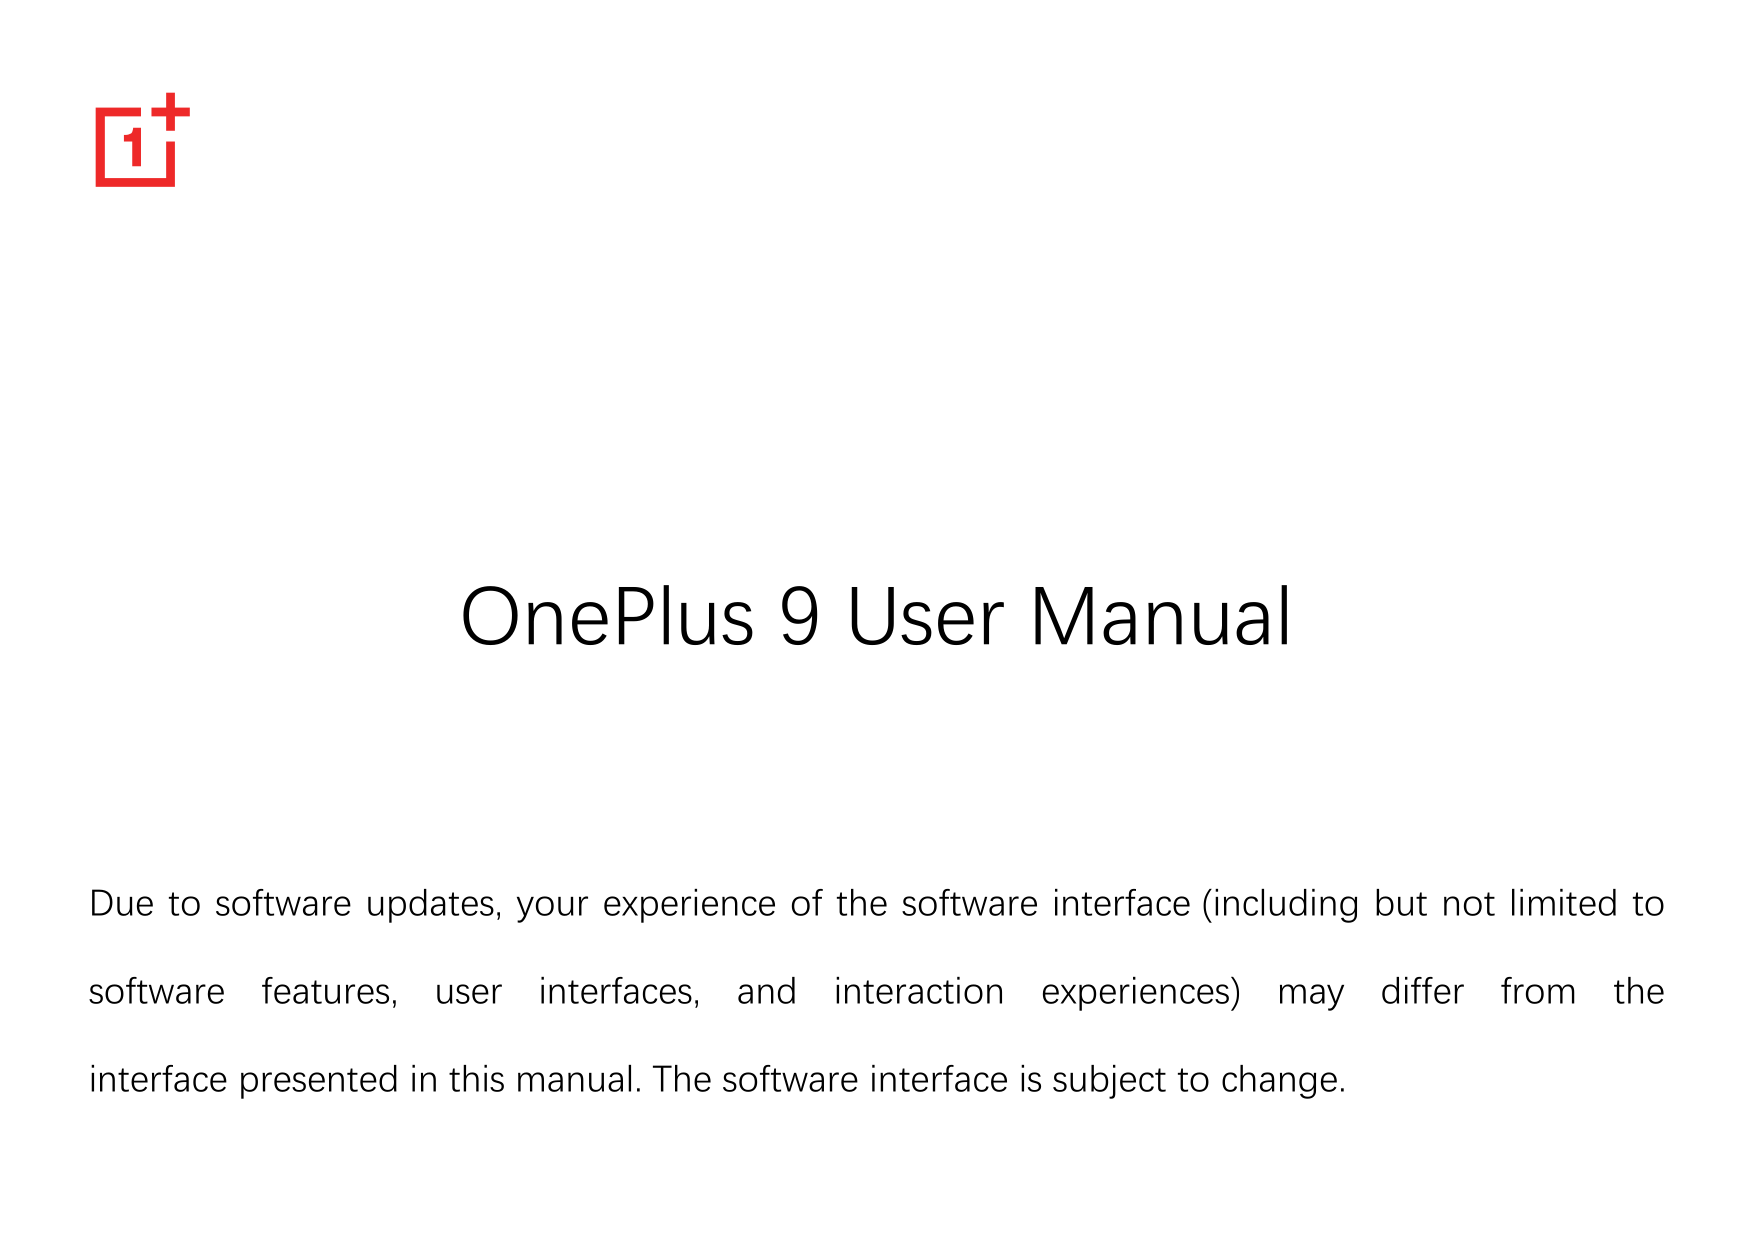 OnePlus 9 User ManualDue to software updates, your experience of the software interface (including but not limited tosoftware fe